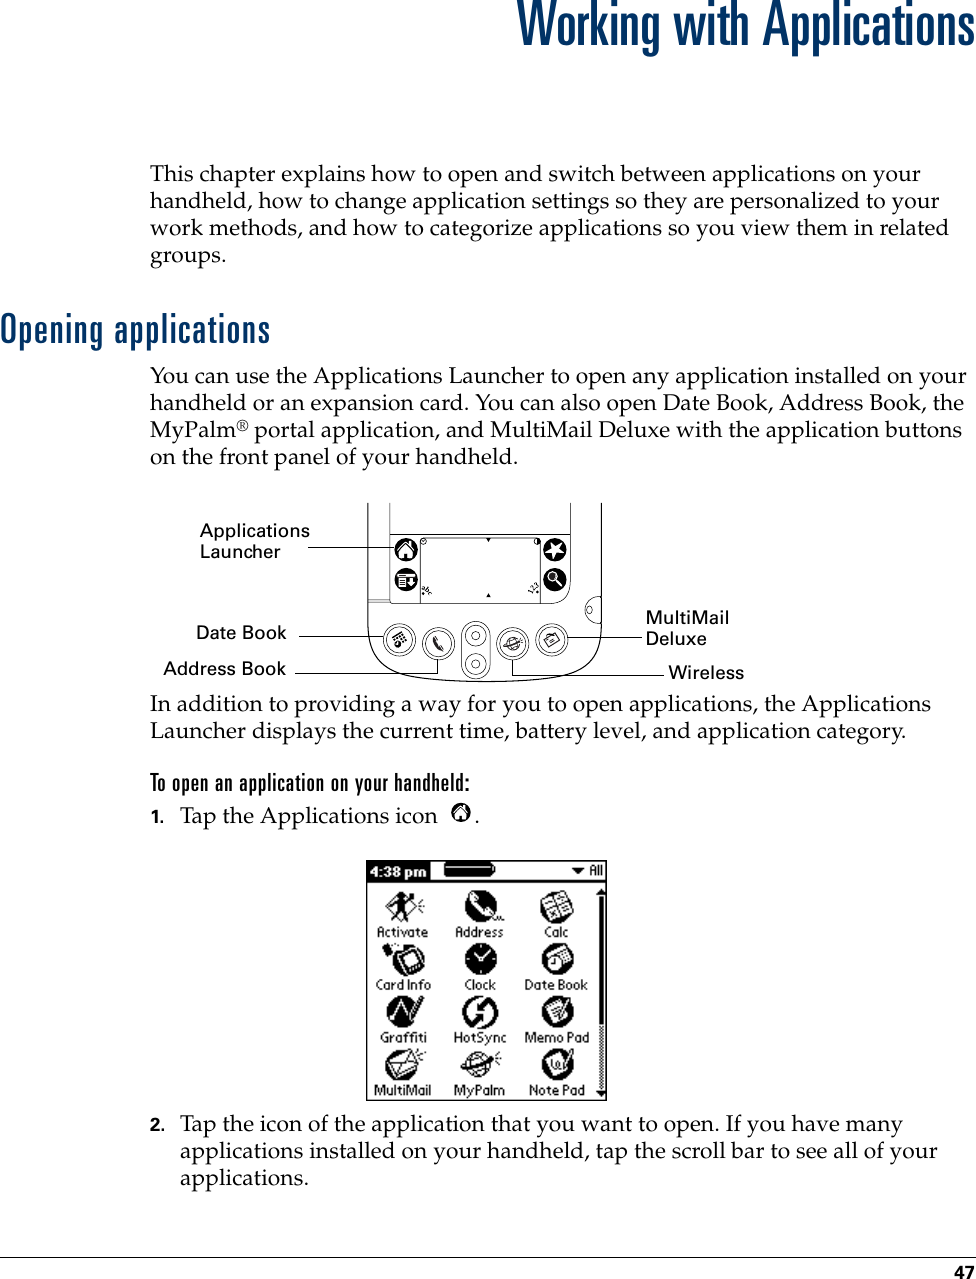 47CHAPTER 5Working with ApplicationsThis chapter explains how to open and switch between applications on your handheld, how to change application settings so they are personalized to your work methods, and how to categorize applications so you view them in related groups. Opening applicationsYou can use the Applications Launcher to open any application installed on your handheld or an expansion card. You can also open Date Book, Address Book, the MyPalm® portal application, and MultiMail Deluxe with the application buttons on the front panel of your handheld.In addition to providing a way for you to open applications, the Applications Launcher displays the current time, battery level, and application category. To open an application on your handheld:1. Tap the Applications icon  . 2. Tap the icon of the application that you want to open. If you have many applications installed on your handheld, tap the scroll bar to see all of your applications. Applications LauncherAddress BookDate Book MultiMail DeluxeWireless